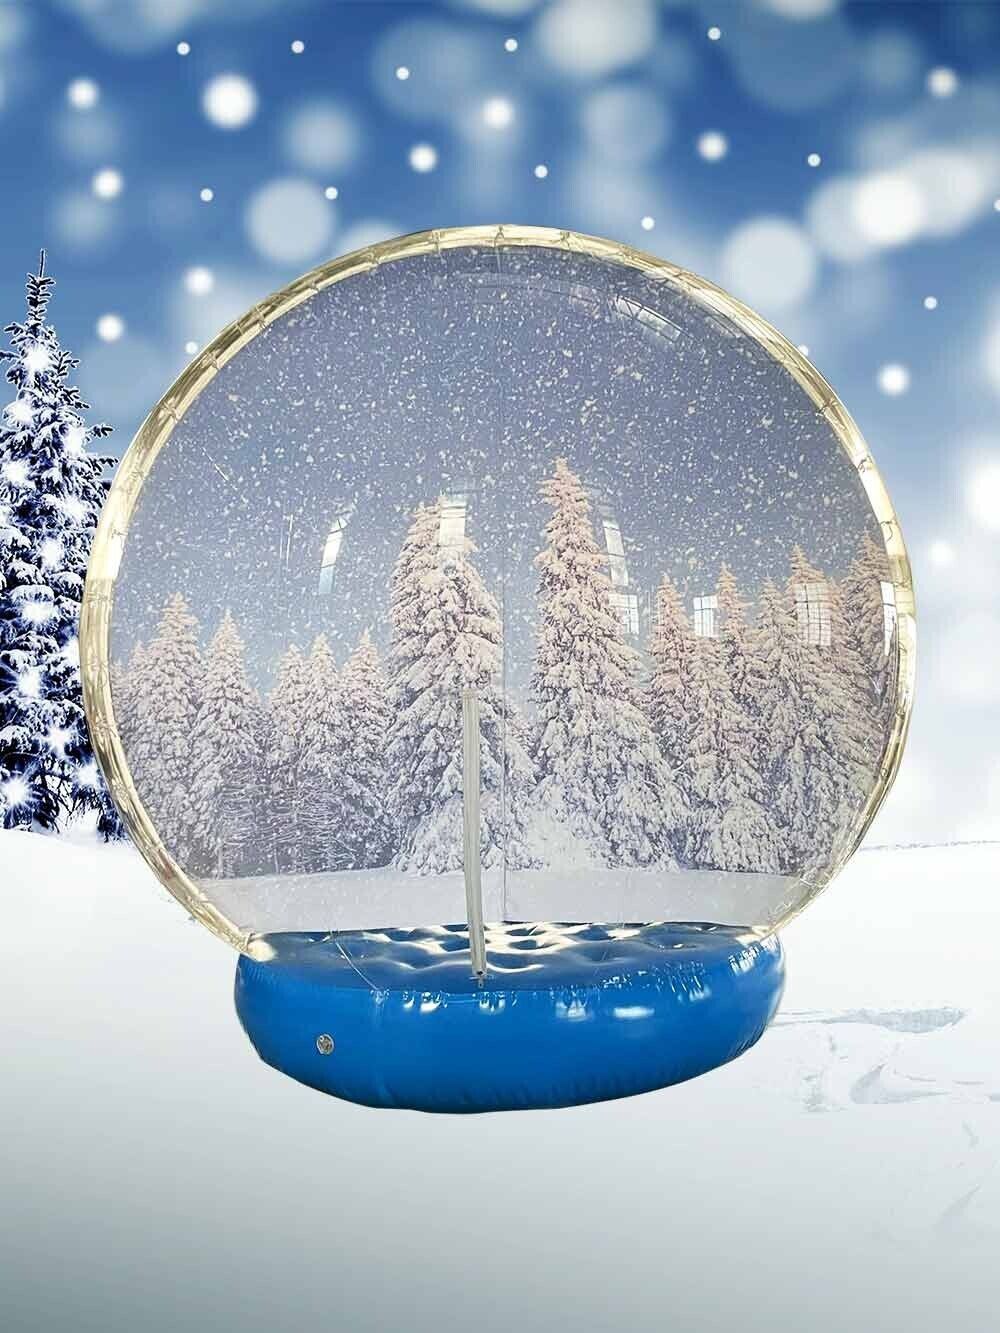 Best Giant Inflatable Snow Globe with Artificial Snowflakes & Snowballs